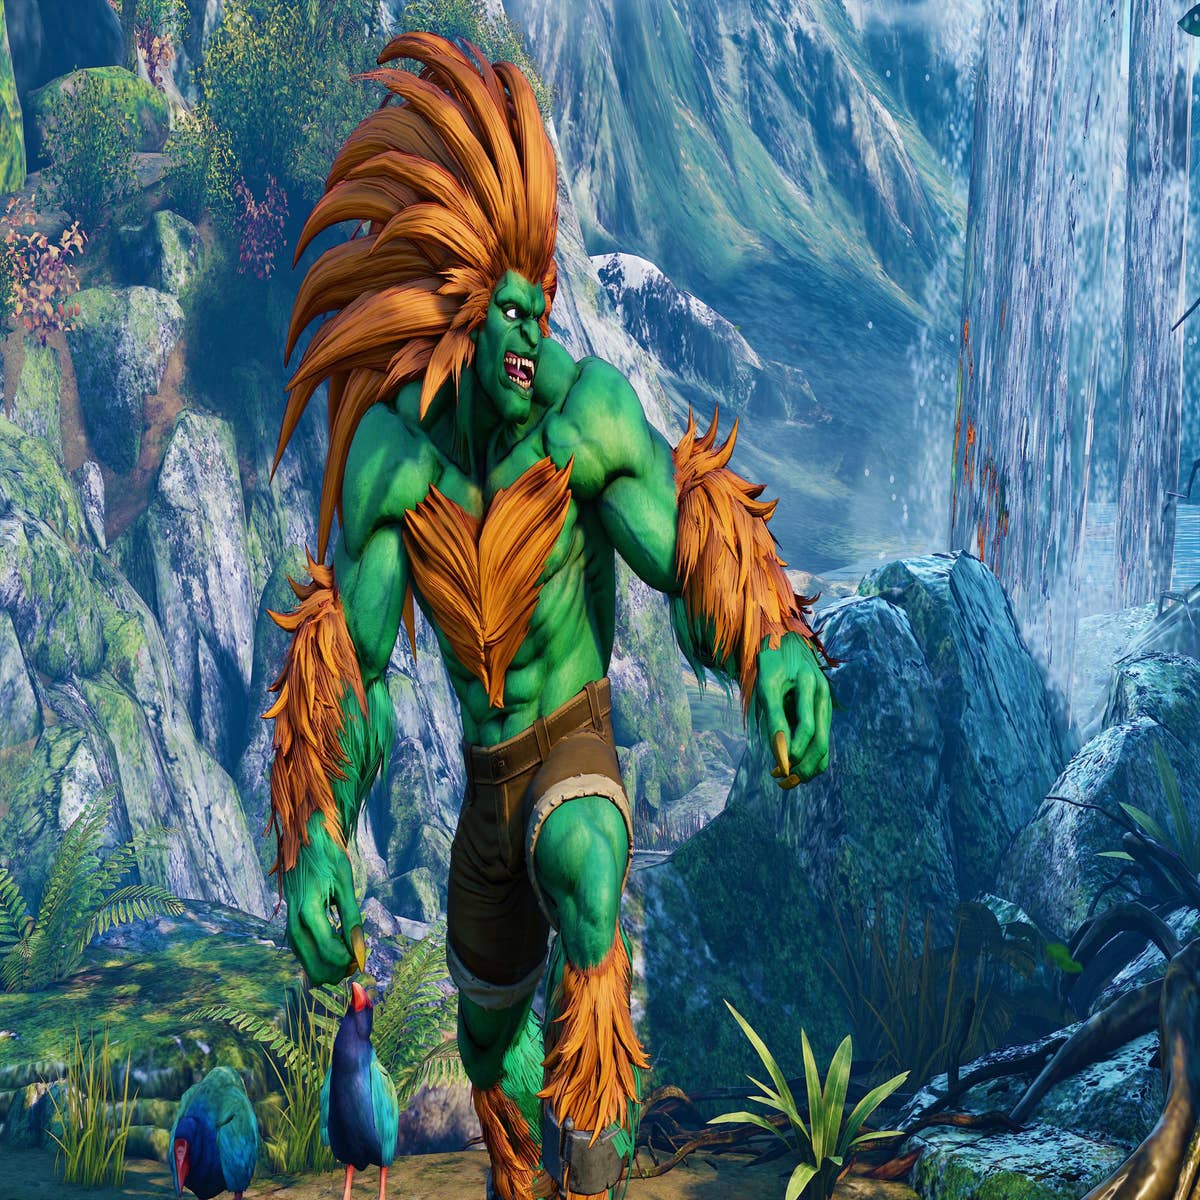 Fighting-Games Daily on X: Street Fighter 6 - Blanka Comparison